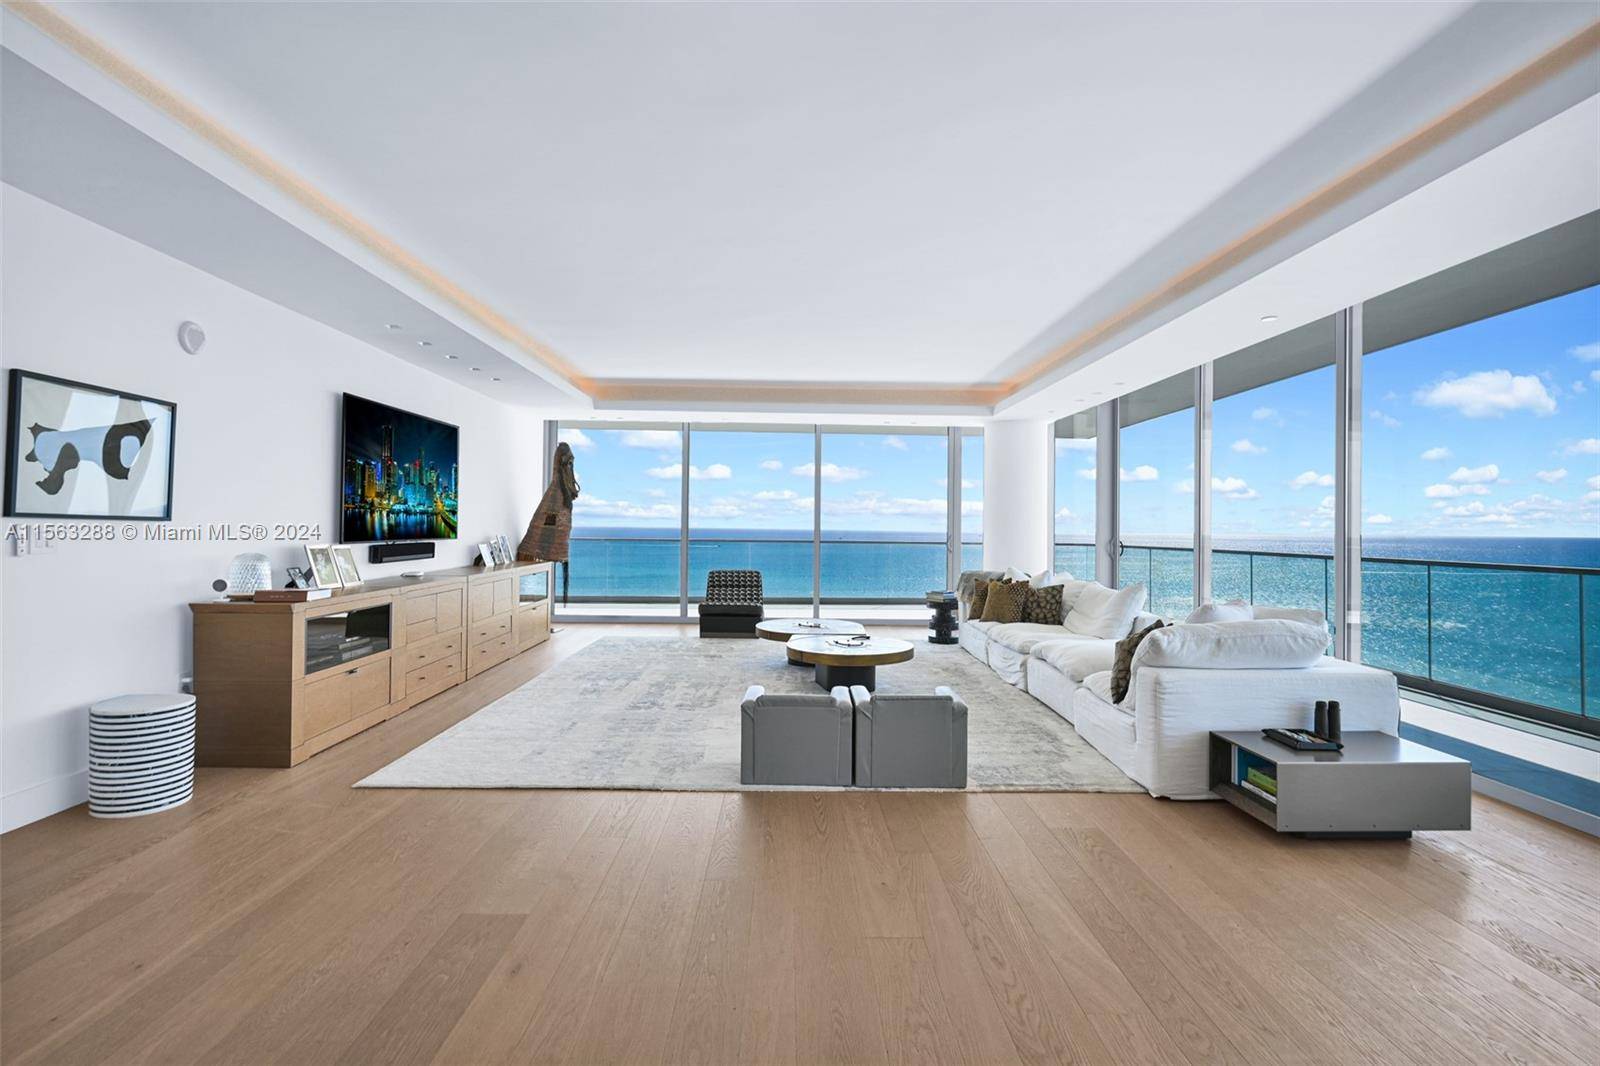 This exceptional high floor oceanfront residence offers unparalleled views of the glistening Atlantic Ocean and iconic Downtown Miami skyline.